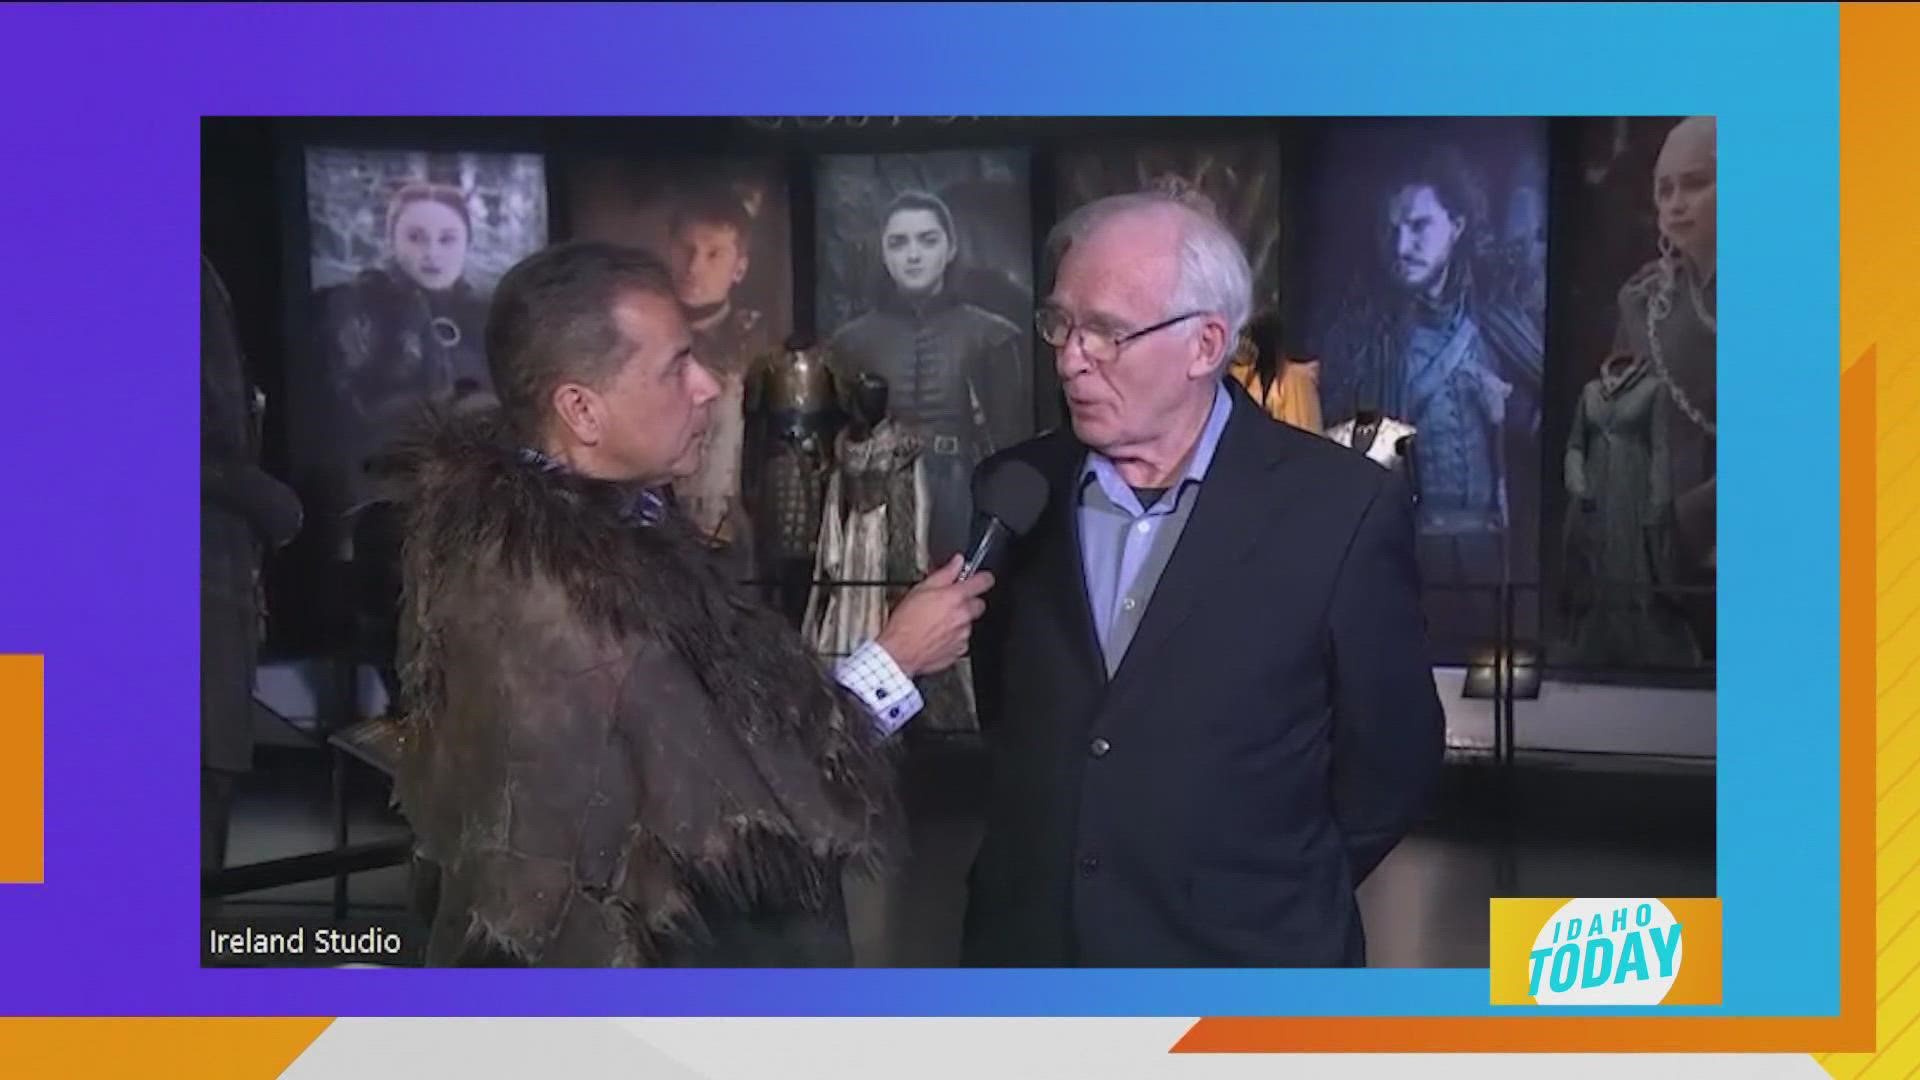 Check out the new studio tour of Games of Thrones in Ireland!